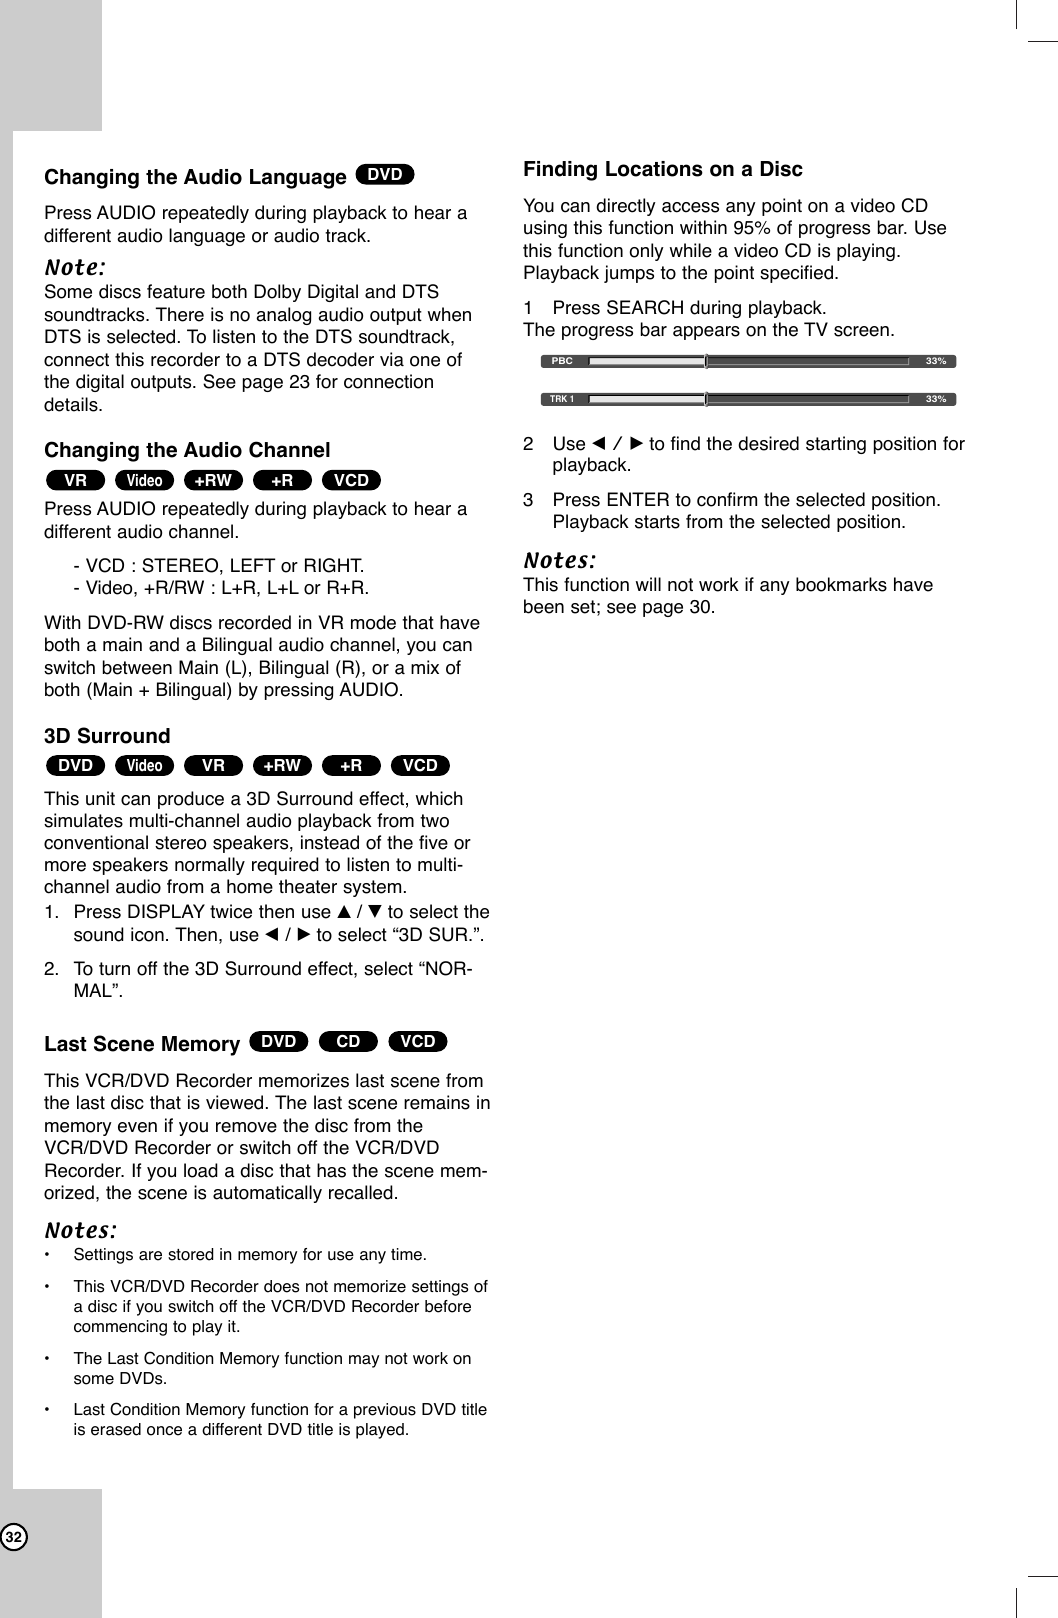 32Changing the Audio Language Press AUDIO repeatedly during playback to hear adifferent audio language or audio track.Note:Some discs feature both Dolby Digital and DTSsoundtracks. There is no analog audio output whenDTS is selected. To listen to the DTS soundtrack,connect this recorder to a DTS decoder via one ofthe digital outputs. See page 23 for connectiondetails.Changing the Audio ChannelPress AUDIO repeatedly during playback to hear adifferent audio channel.- VCD : STEREO, LEFT or RIGHT.- Video, +R/RW : L+R, L+L or R+R.With DVD-RW discs recorded in VR mode that haveboth a main and a Bilingual audio channel, you canswitch between Main (L), Bilingual (R), or a mix ofboth (Main + Bilingual) by pressing AUDIO.3D Surround This unit can produce a 3D Surround effect, which simulates multi-channel audio playback from two conventional stereo speakers, instead of the five ormore speakers normally required to listen to multi-channel audio from a home theater system. 1. Press DISPLAY twice then use v/ Vto select thesound icon. Then, use b/ Bto select “3D SUR.”.2. To turn off the 3D Surround effect, select “NOR-MAL”.Last Scene Memory This VCR/DVD Recorder memorizes last scene fromthe last disc that is viewed. The last scene remains inmemory even if you remove the disc from theVCR/DVD Recorder or switch off the VCR/DVDRecorder. If you load a disc that has the scene mem-orized, the scene is automatically recalled.Notes:•Settings are stored in memory for use any time.•This VCR/DVD Recorder does not memorize settings ofa disc if you switch off the VCR/DVD Recorder beforecommencing to play it.•The Last Condition Memory function may not work onsome DVDs.•Last Condition Memory function for a previous DVD titleis erased once a different DVD title is played.Finding Locations on a Disc You can directly access any point on a video CDusing this function within 95% of progress bar. Usethis function only while a video CD is playing.Playback jumps to the point specified.1Press SEARCH during playback.The progress bar appears on the TV screen.2Use b / B to find the desired starting position forplayback.3Press ENTER to confirm the selected position.Playback starts from the selected position.Notes:This function will not work if any bookmarks havebeen set; see page 30.VCDCDDVDVCD+R+RWVRVideoDVDVCD+R+RWVideoVRDVD33%PBC33%TRK 1